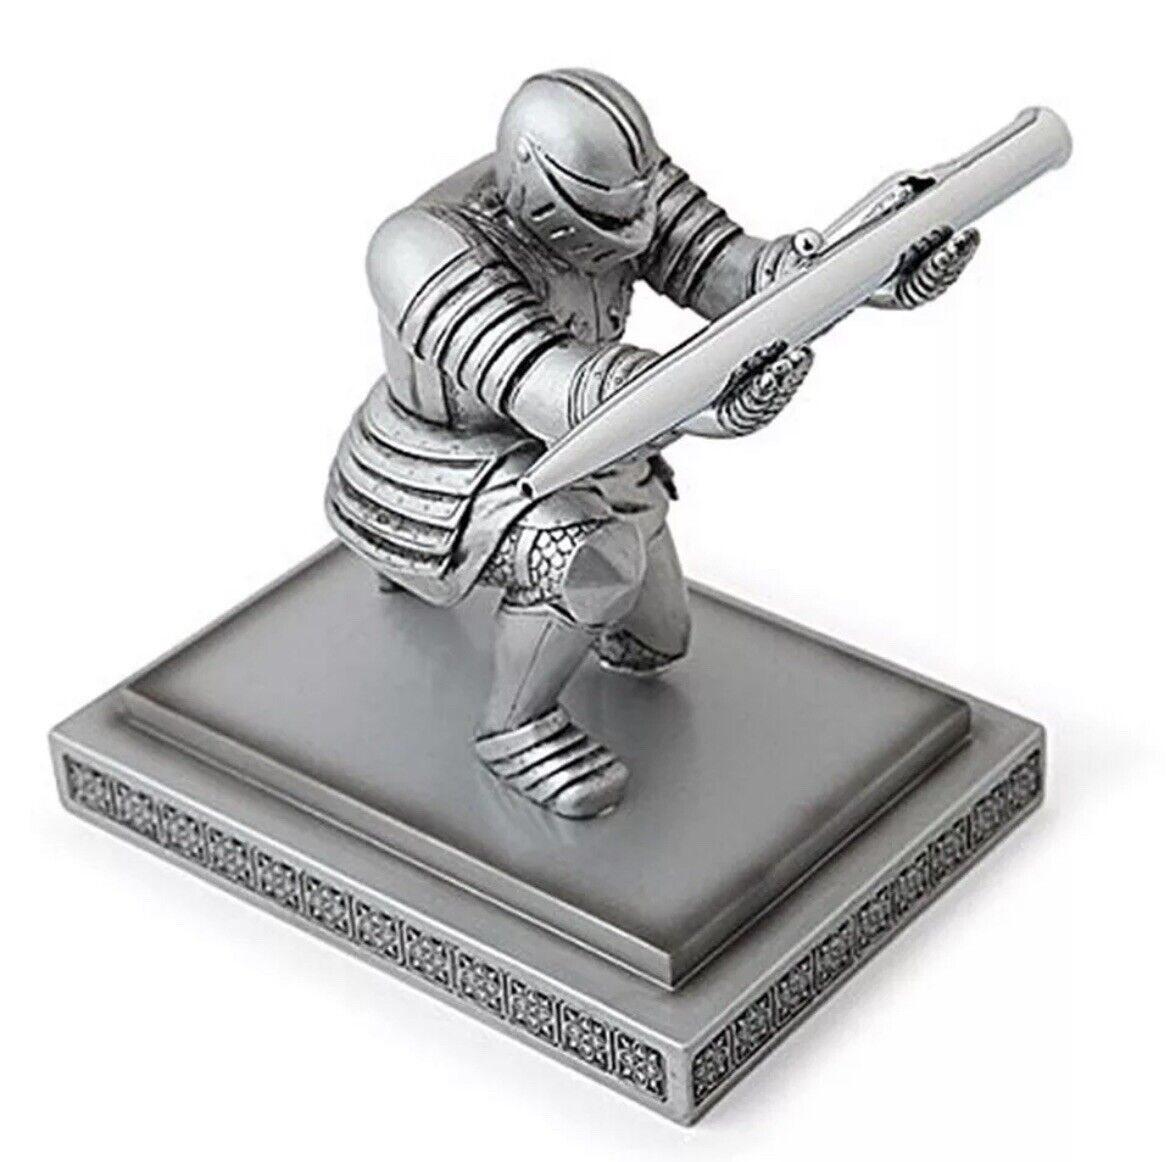 Executive Medieval Soldier Knight Pen Holder Stand Office Desk Decor